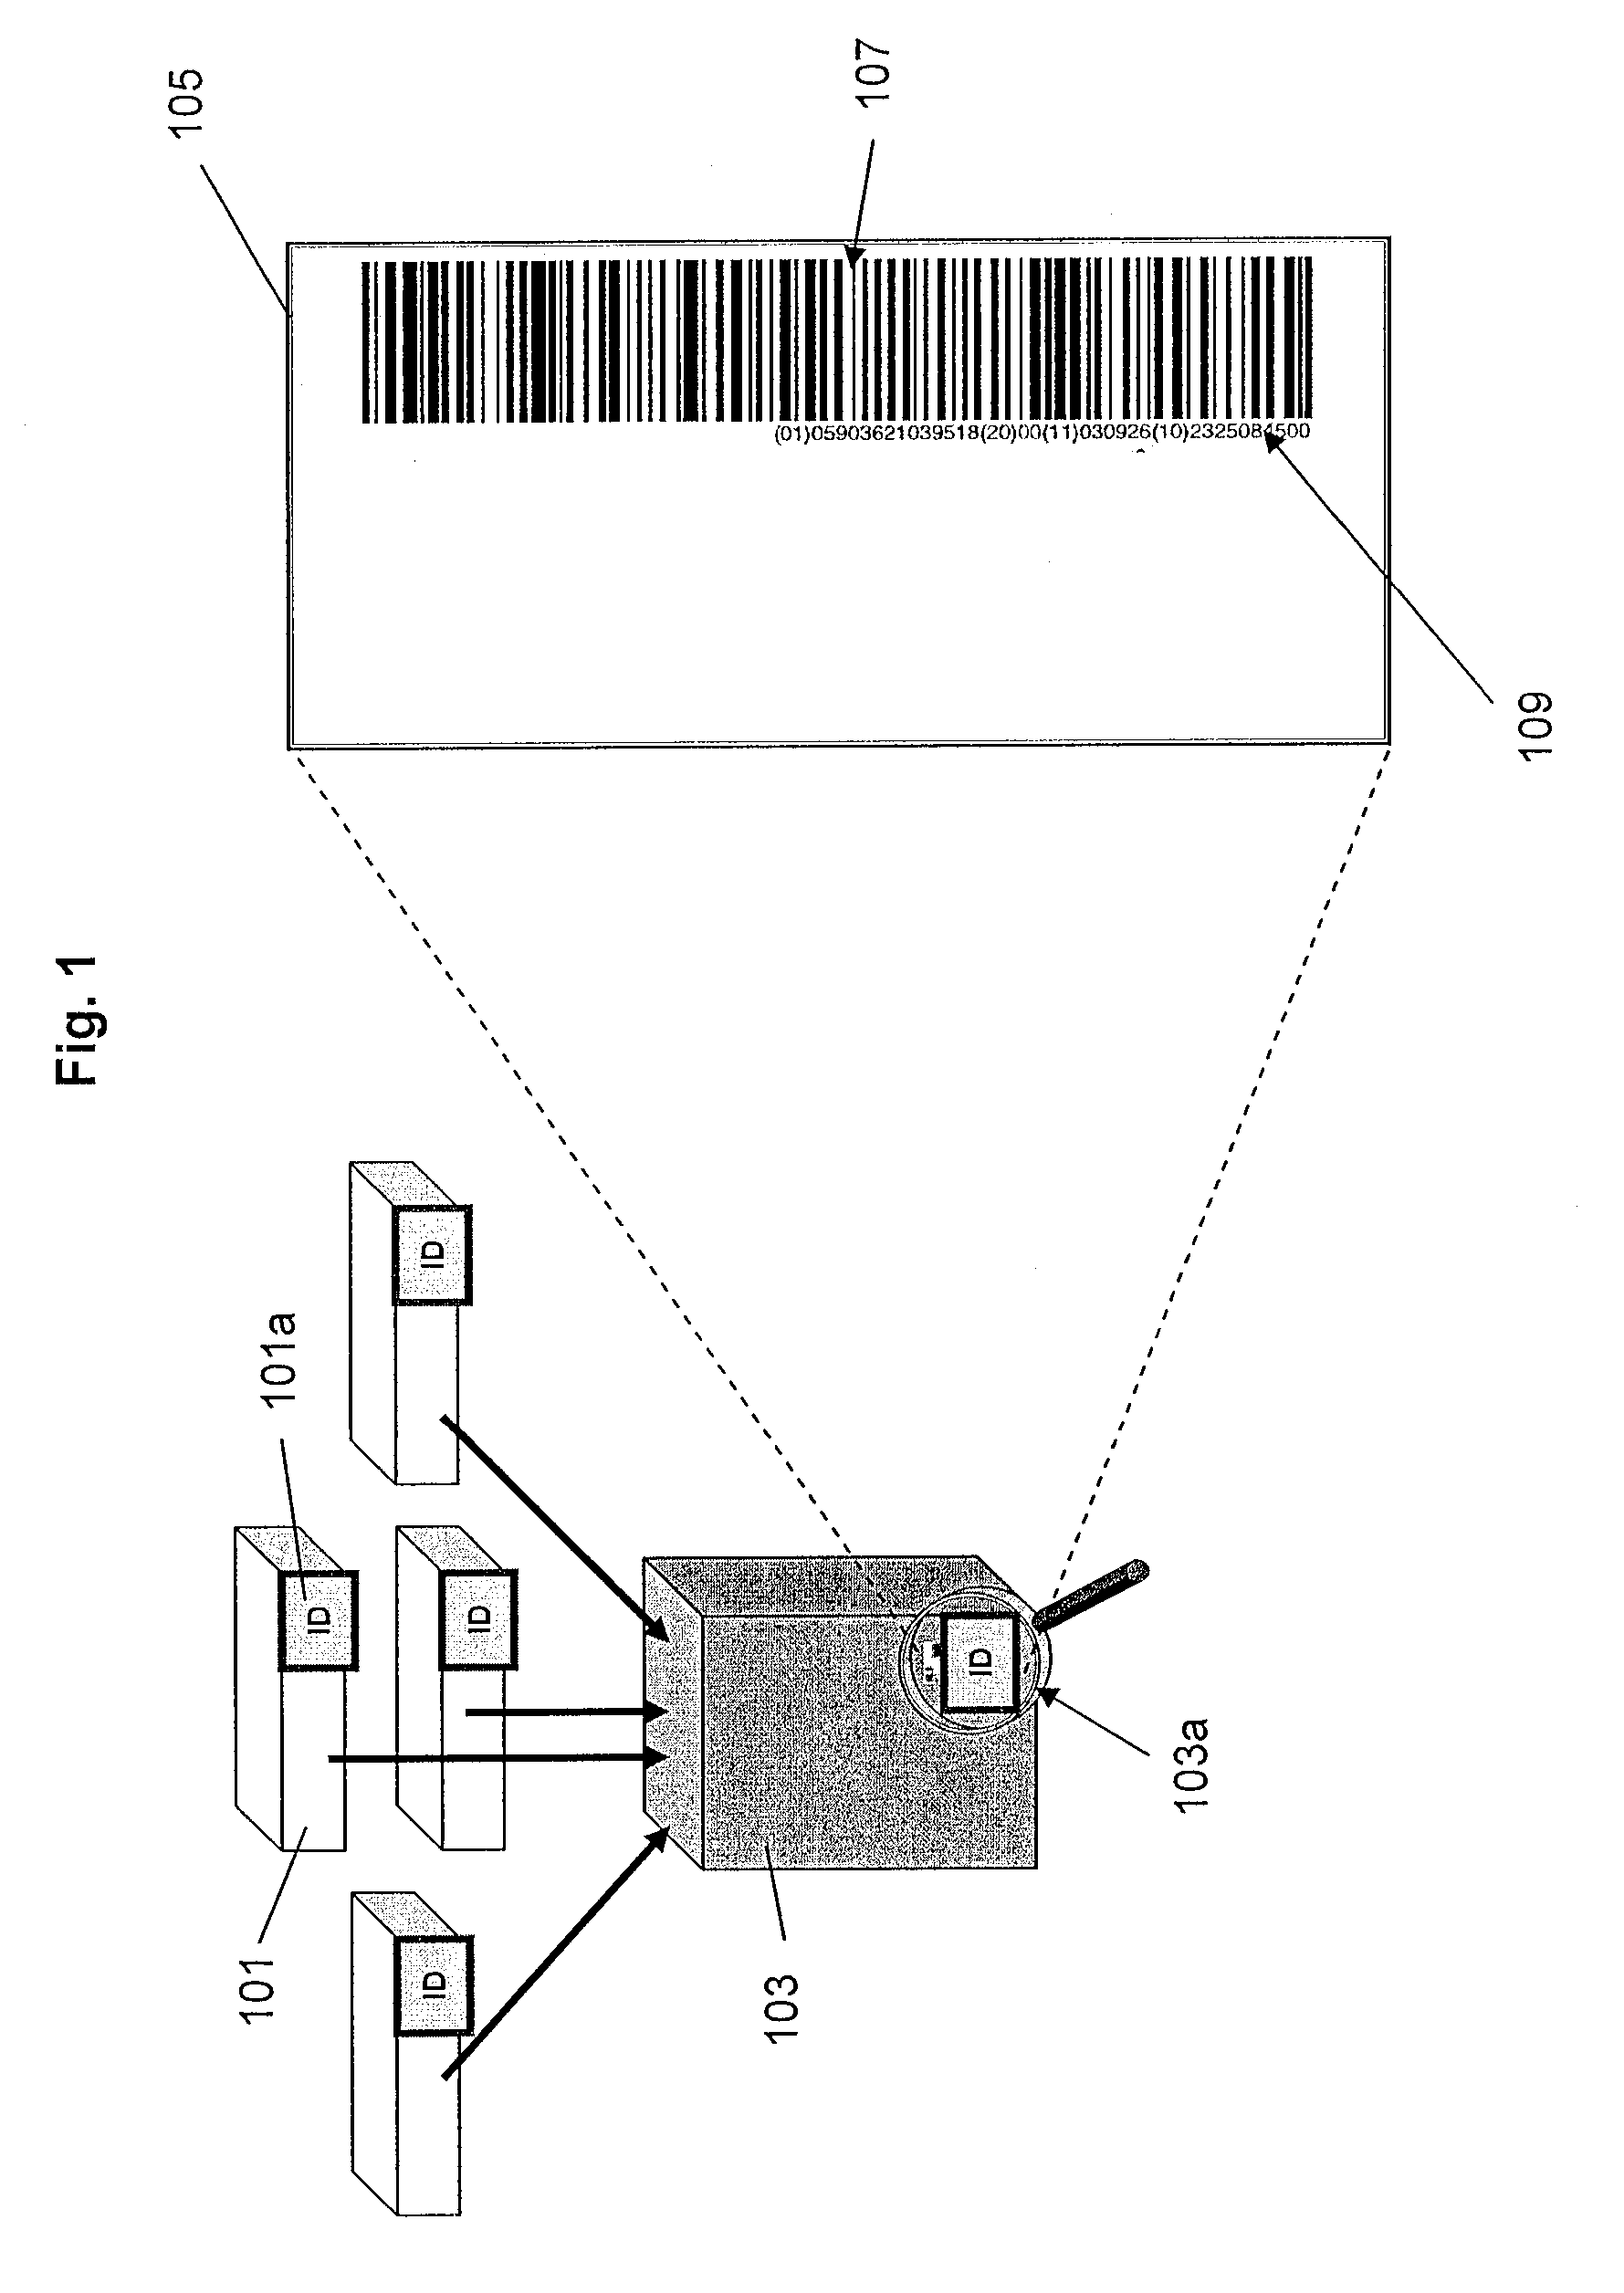 Method and apparatus for identifying, authenticating, tracking and tracing manufactured items